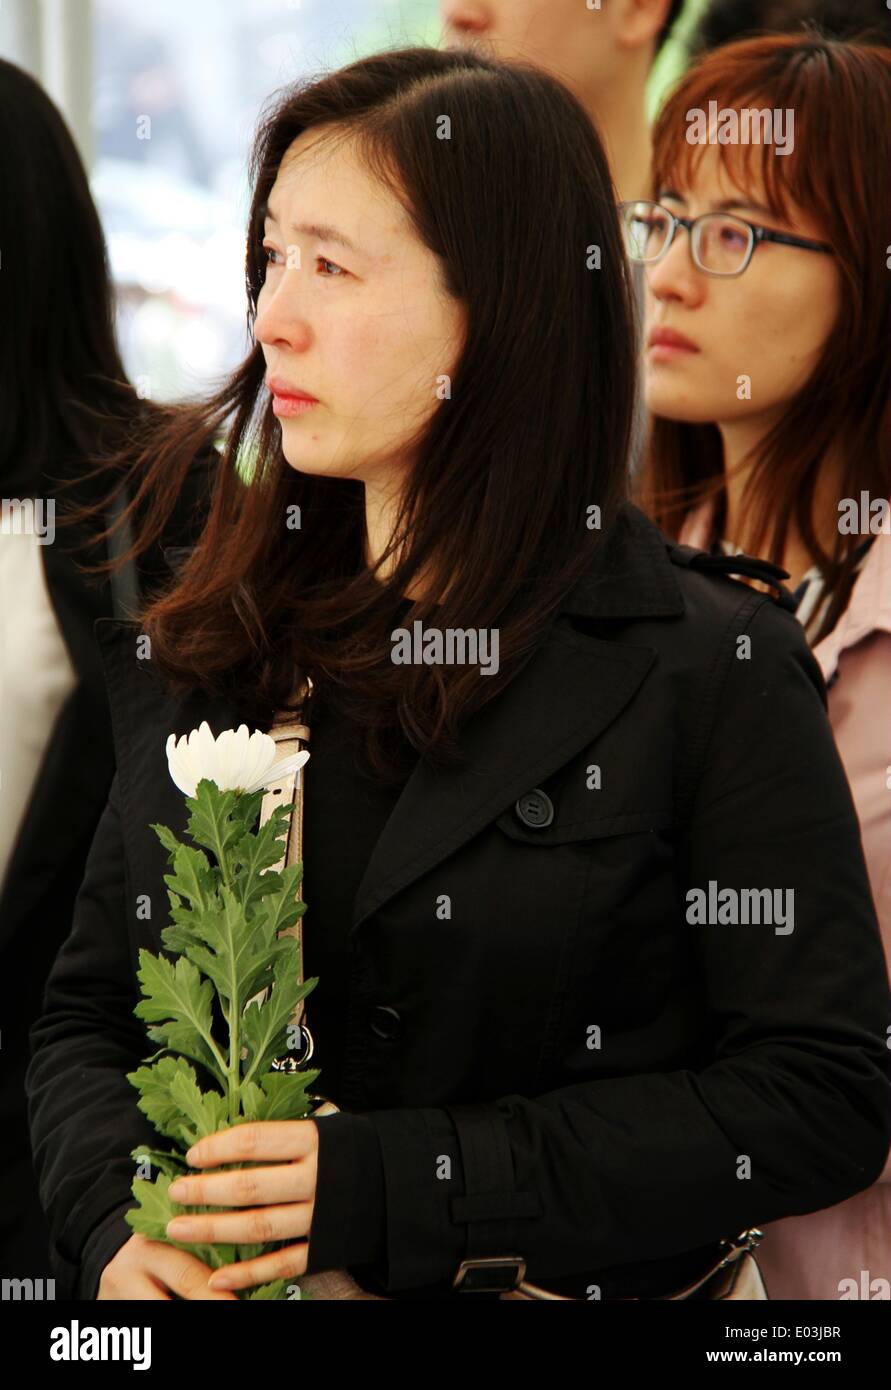 Seoul, South Korea. 1st May, 2014. A woman holding a white chrysanthemum waits to pay tribute to victims of the sunken South Korean ferry 'Sewol' at a group memorial altar in Seoul, South Korea, on May 1, 2014. © Peng Qian/Xinhua/Alamy Live News Stock Photo